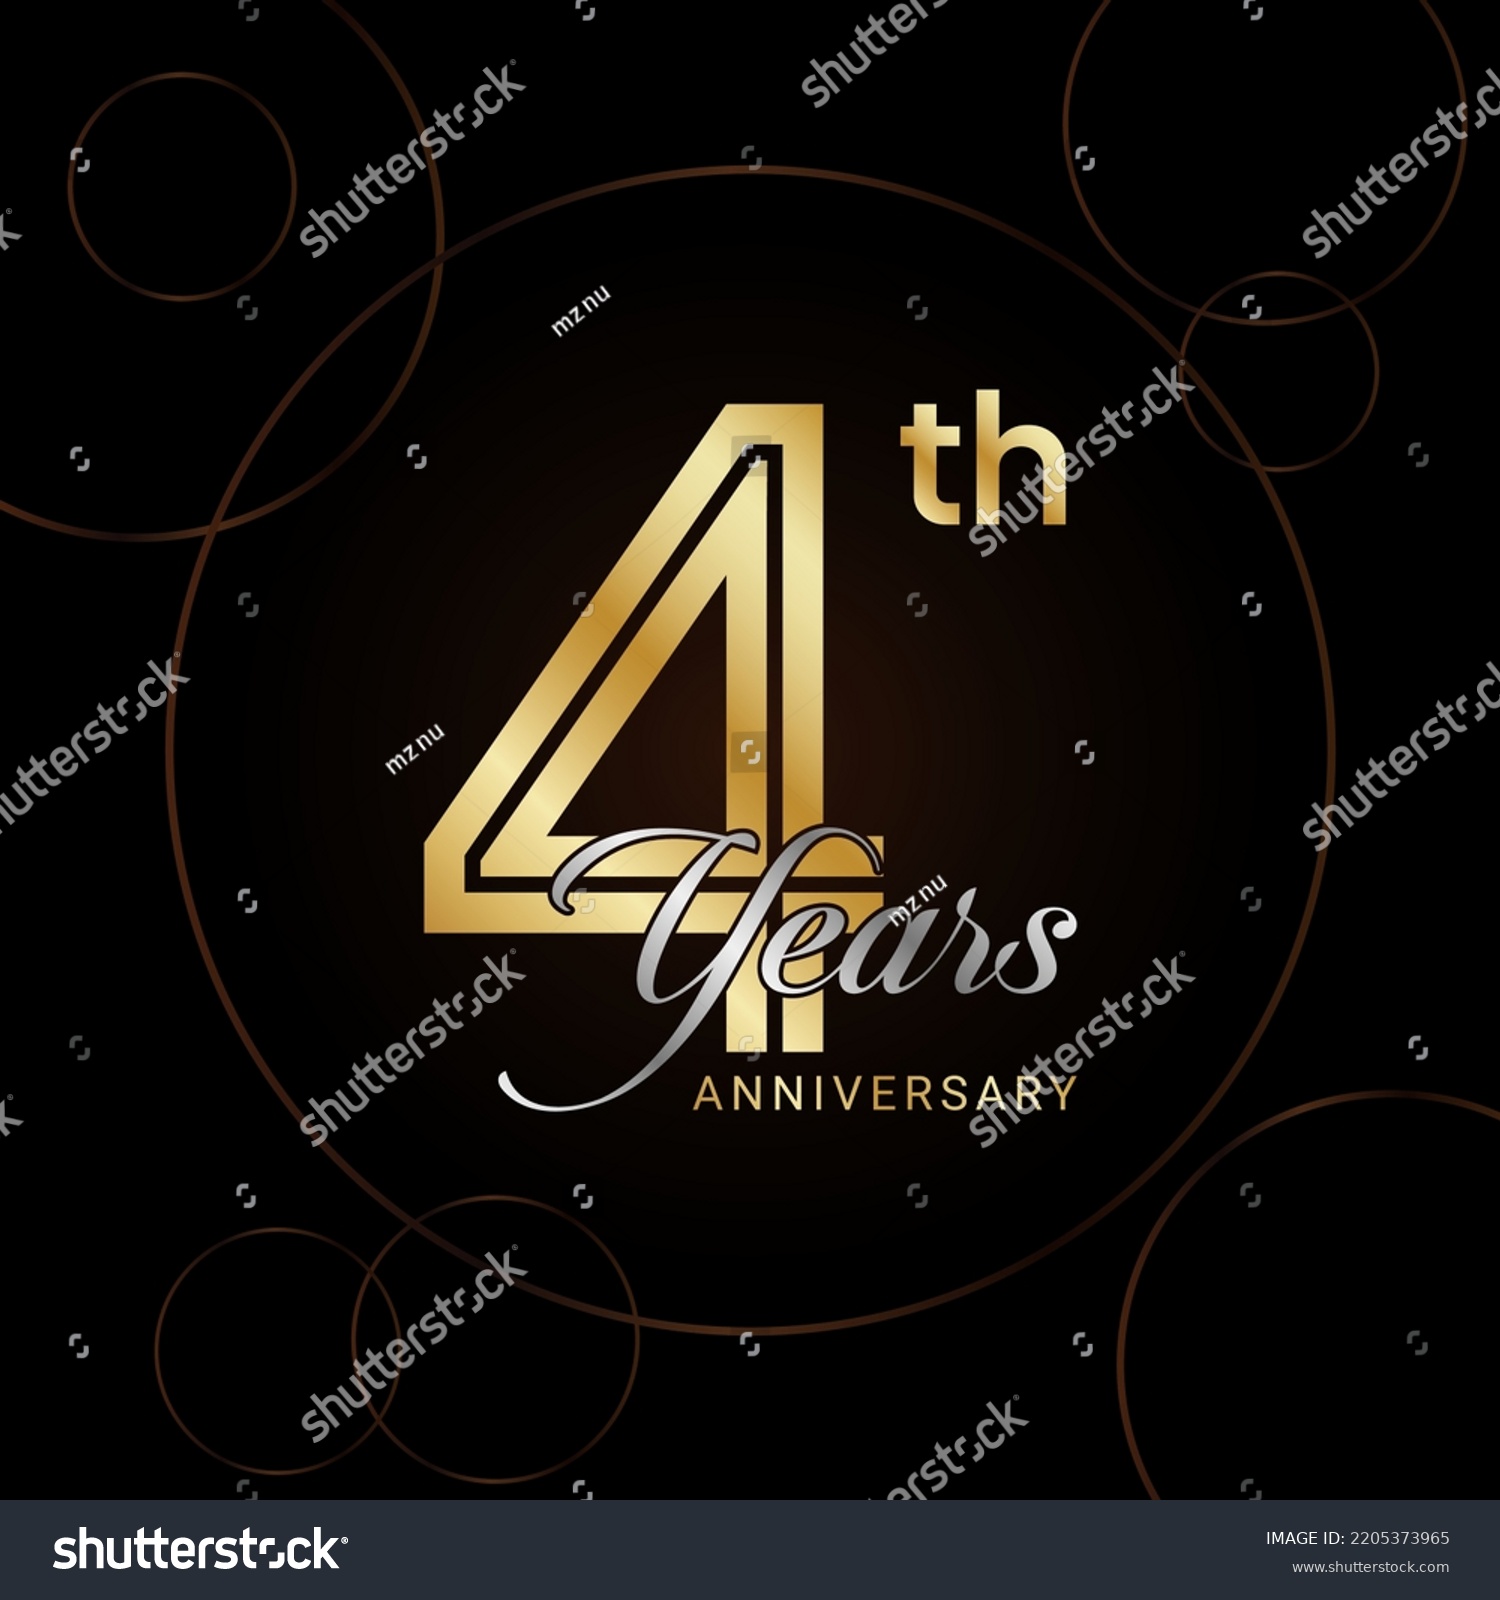 SVG of 4th Anniversary Celebration with golden text, Golden anniversary vector template svg